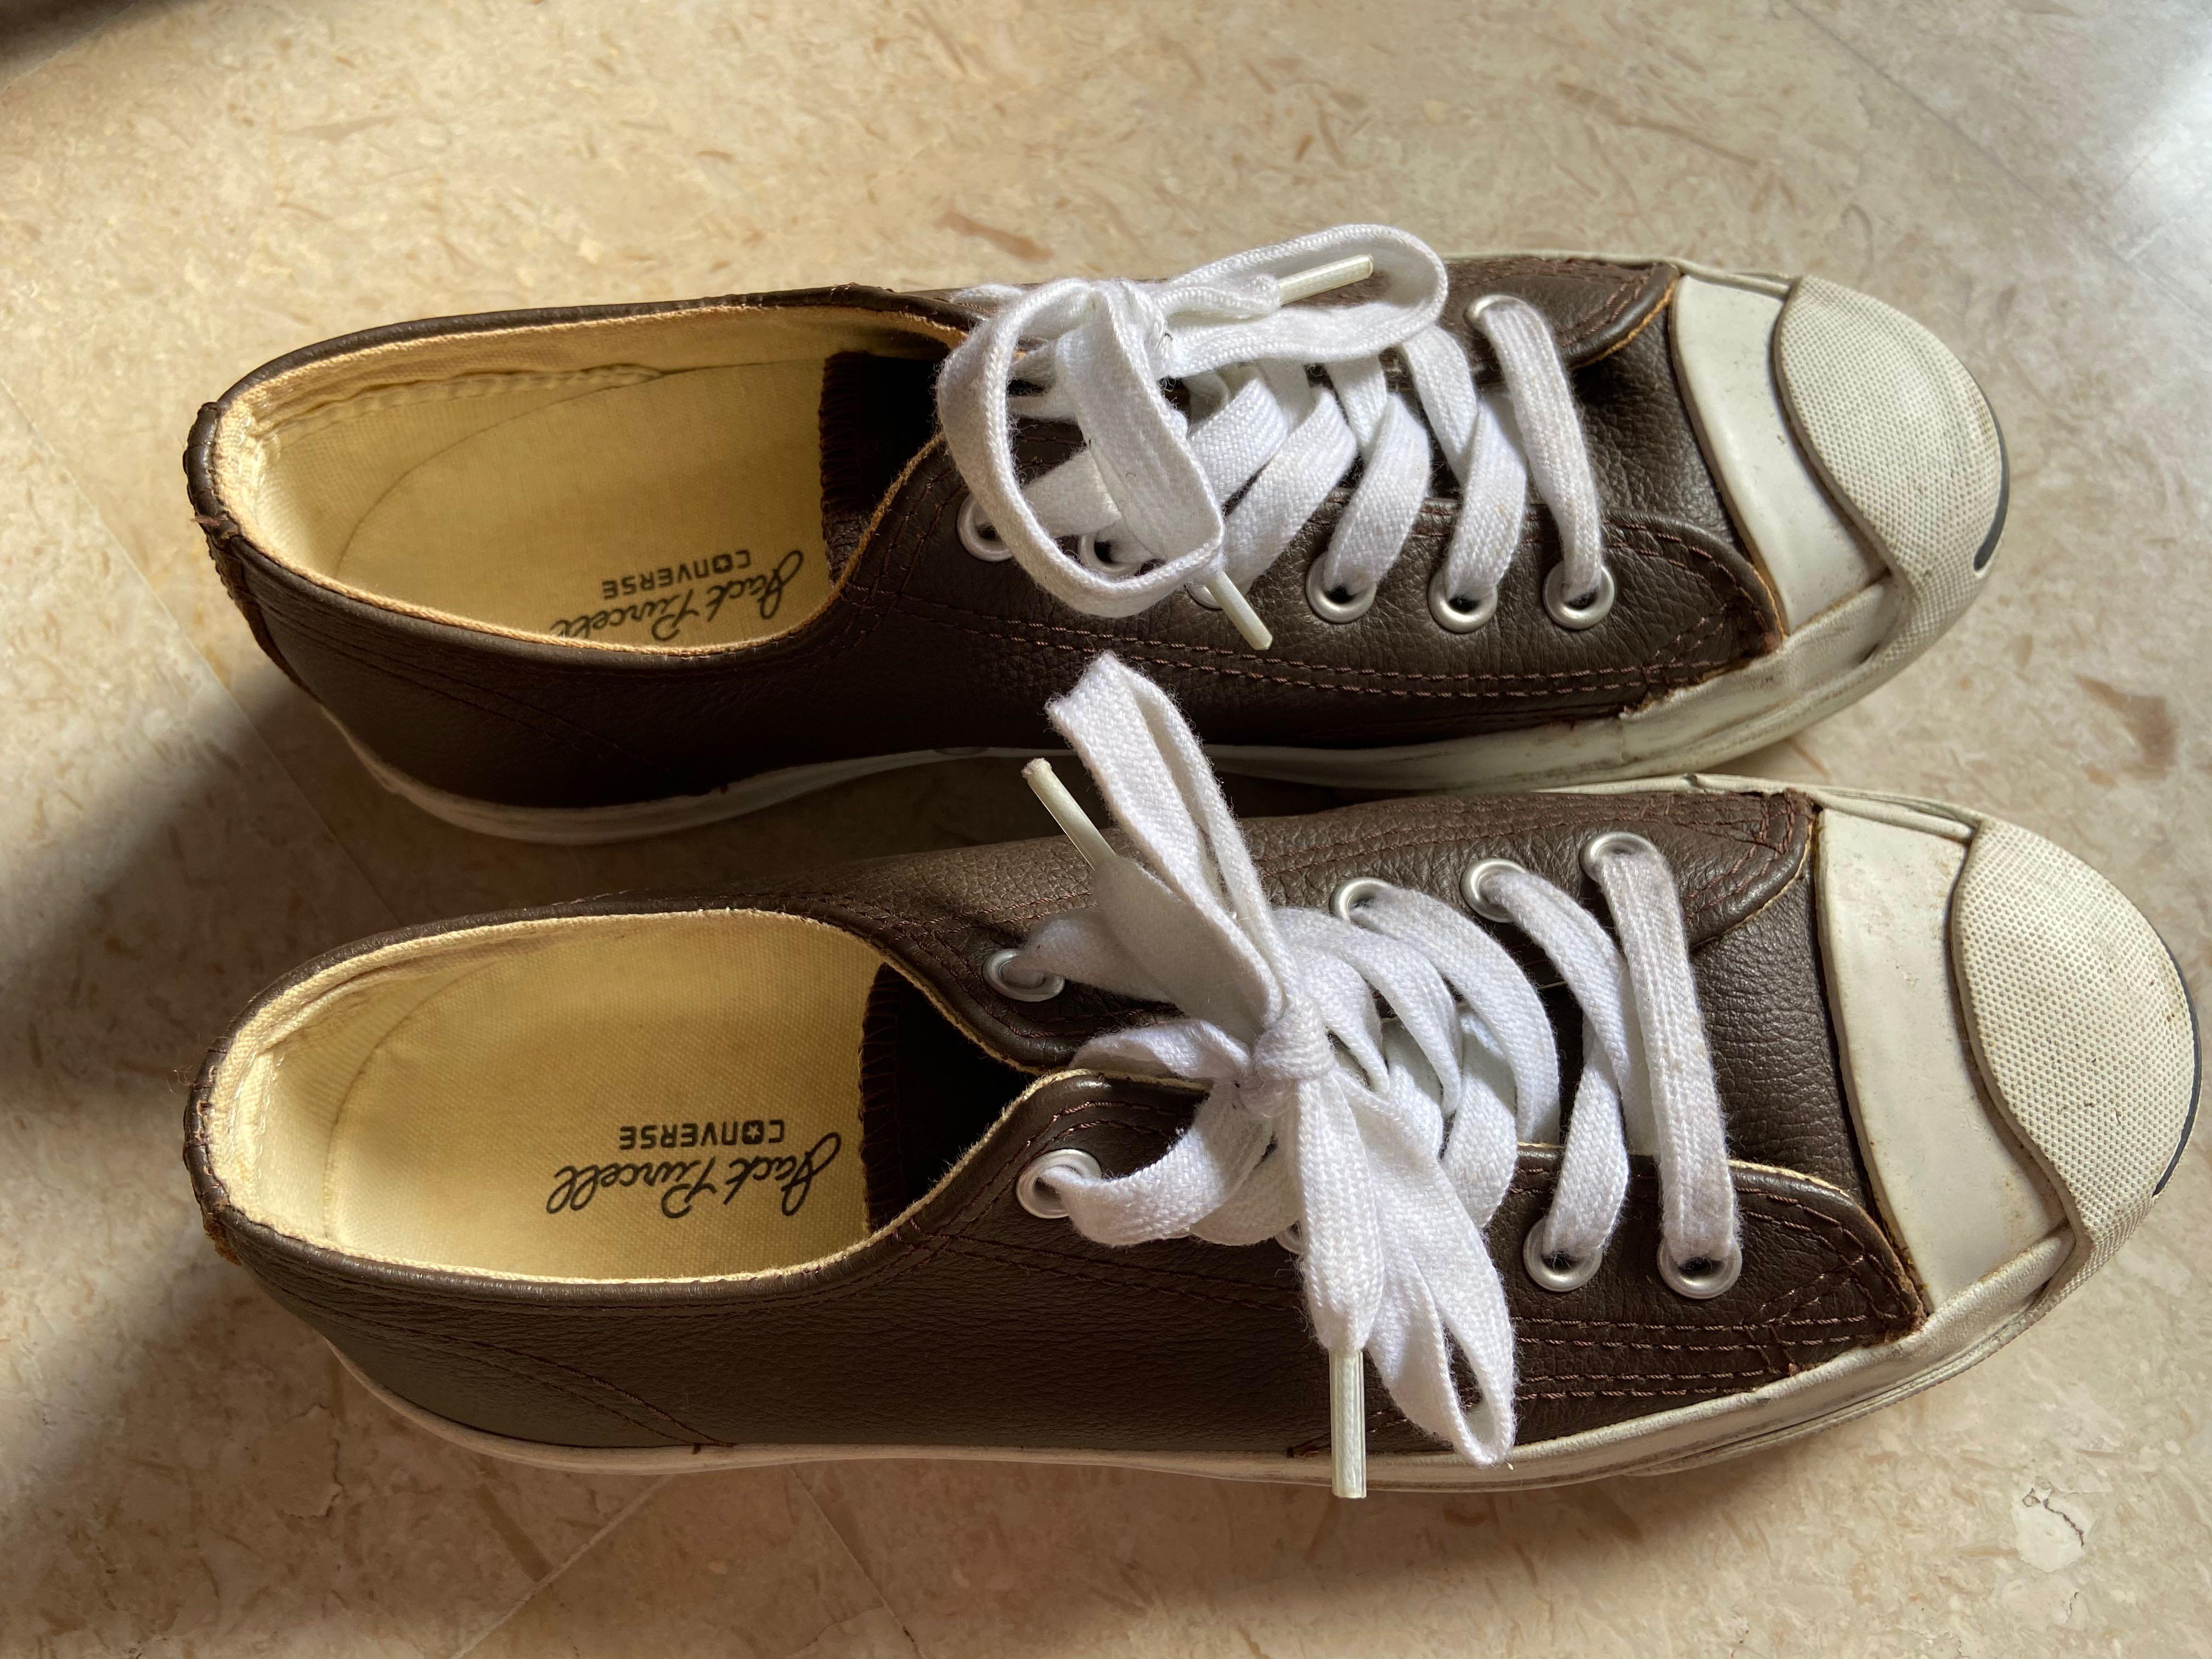 Jack Purcell Converse Leather Sneakers in Brown (Size 37.5), Women's Fashion, Footwear, on Carousell